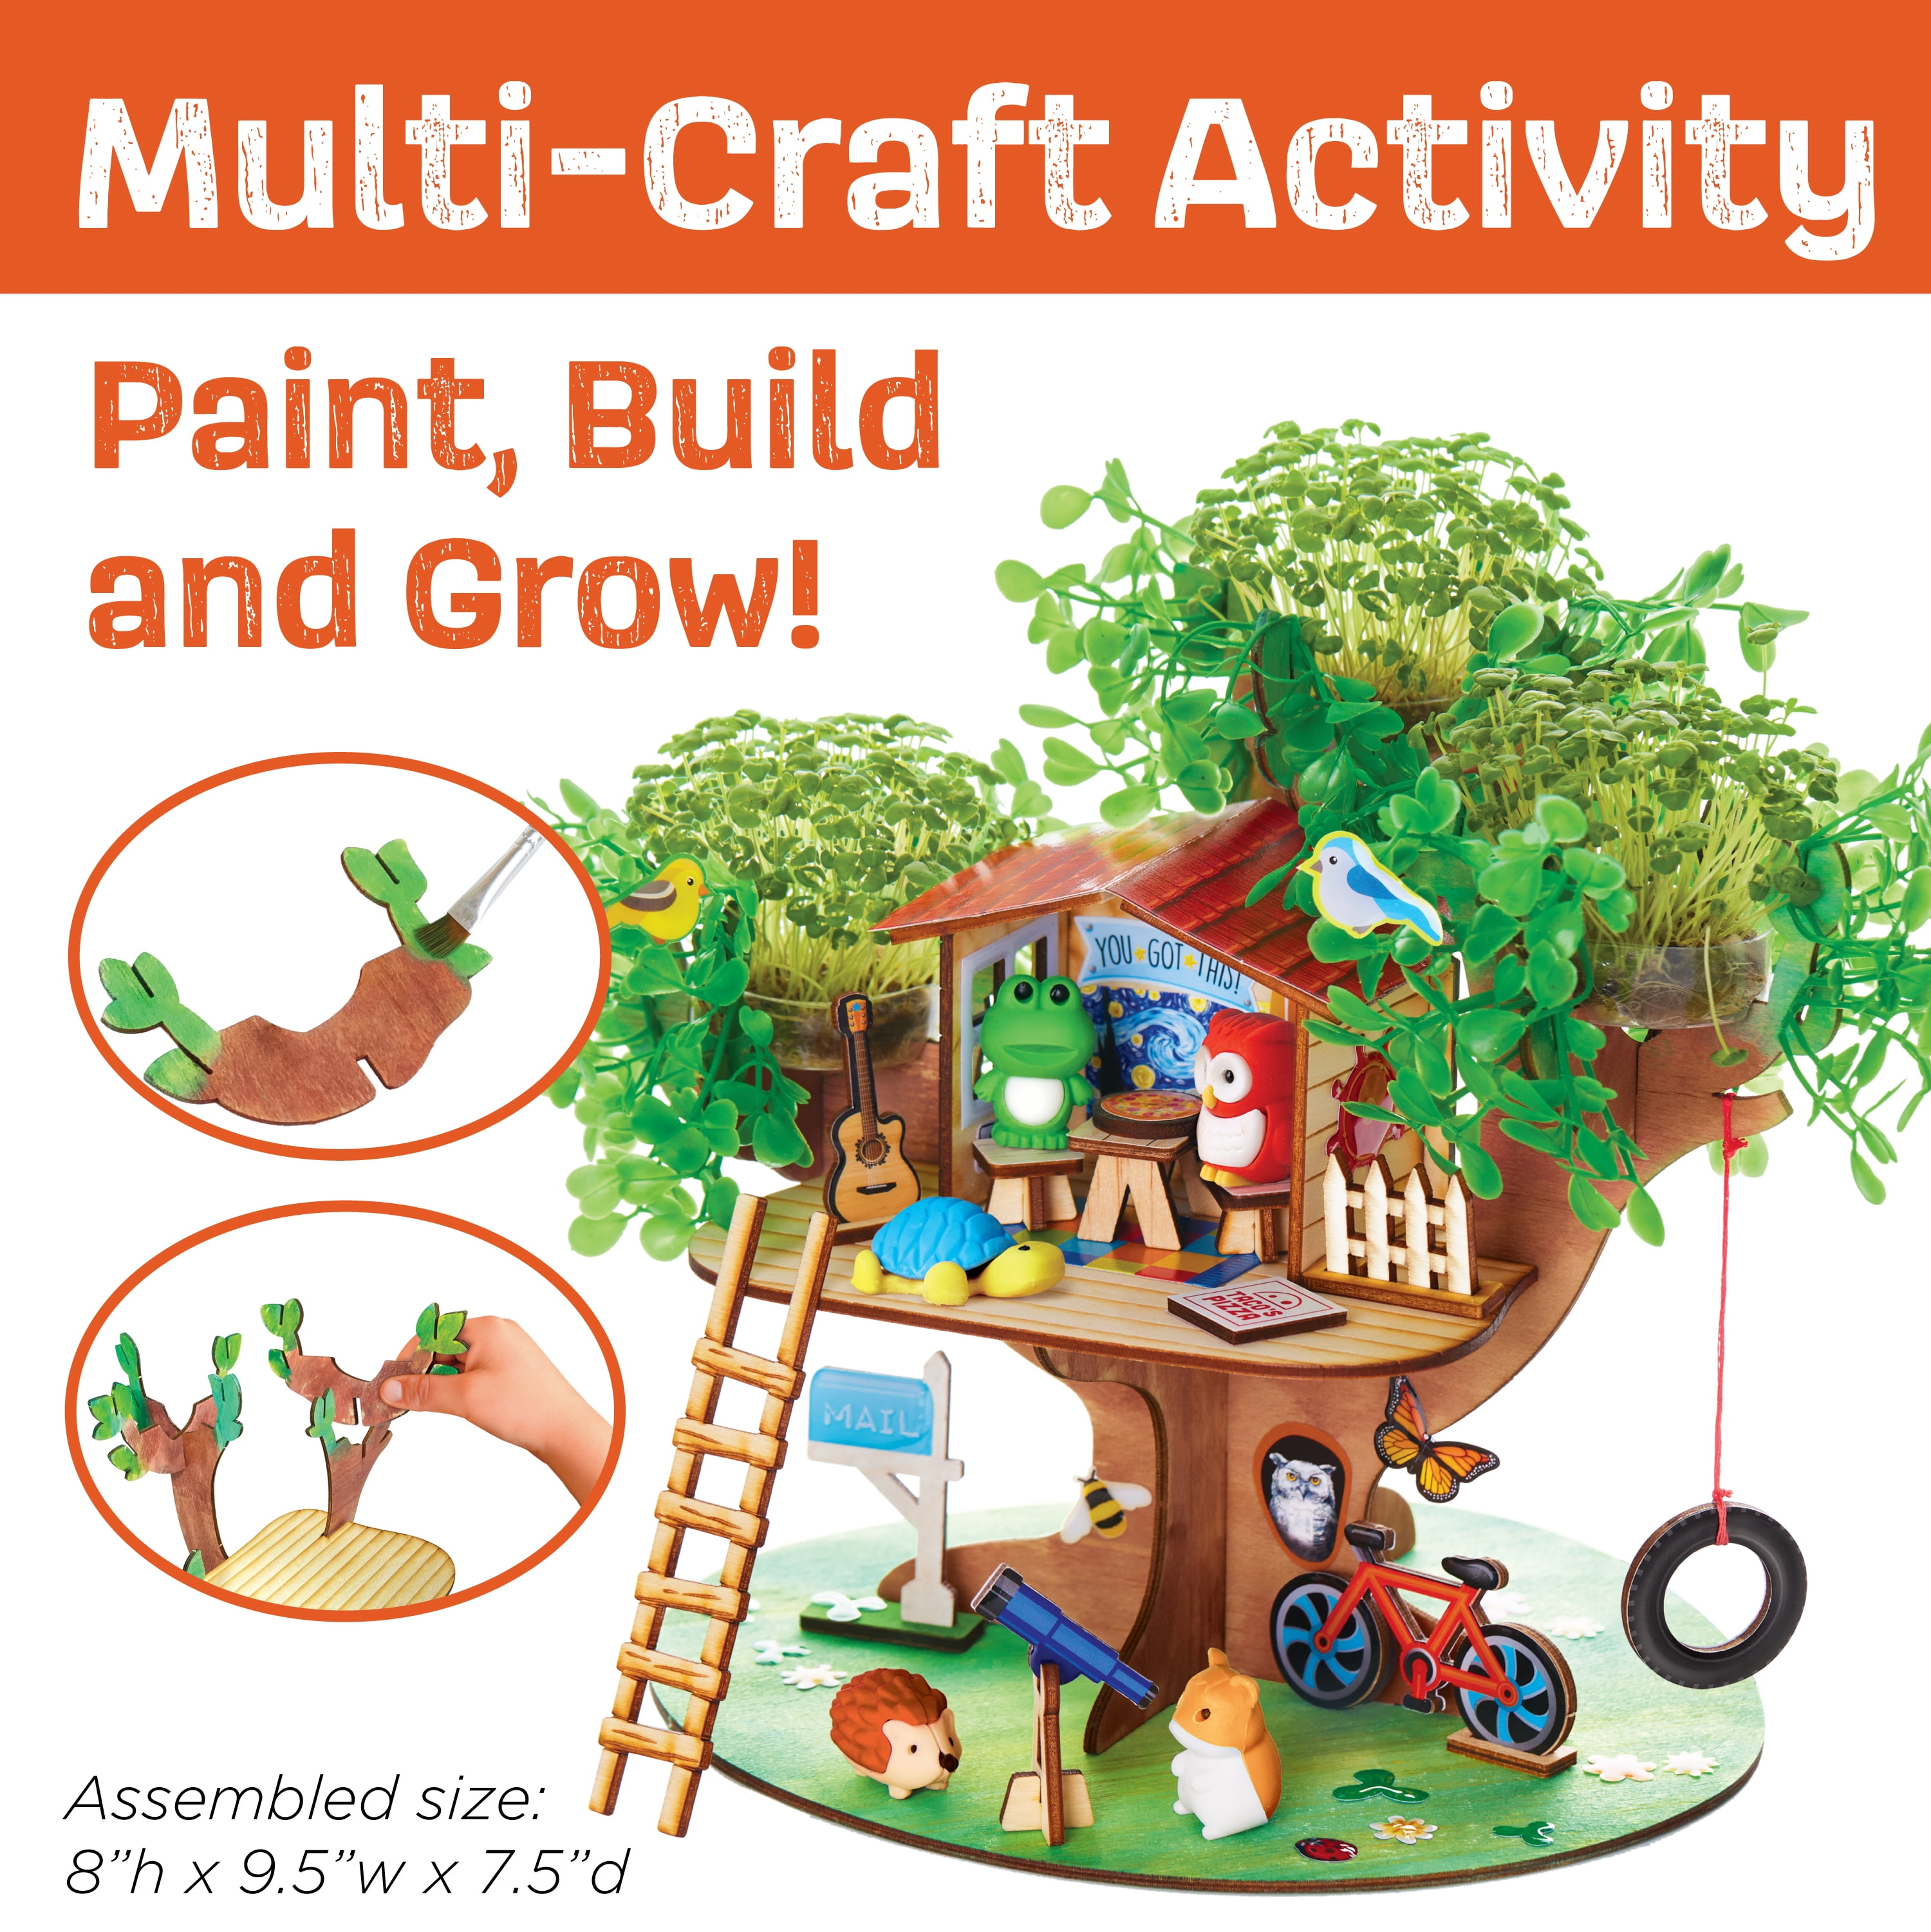 gluing activities for toddlers & Kids - The Inspired Treehouse